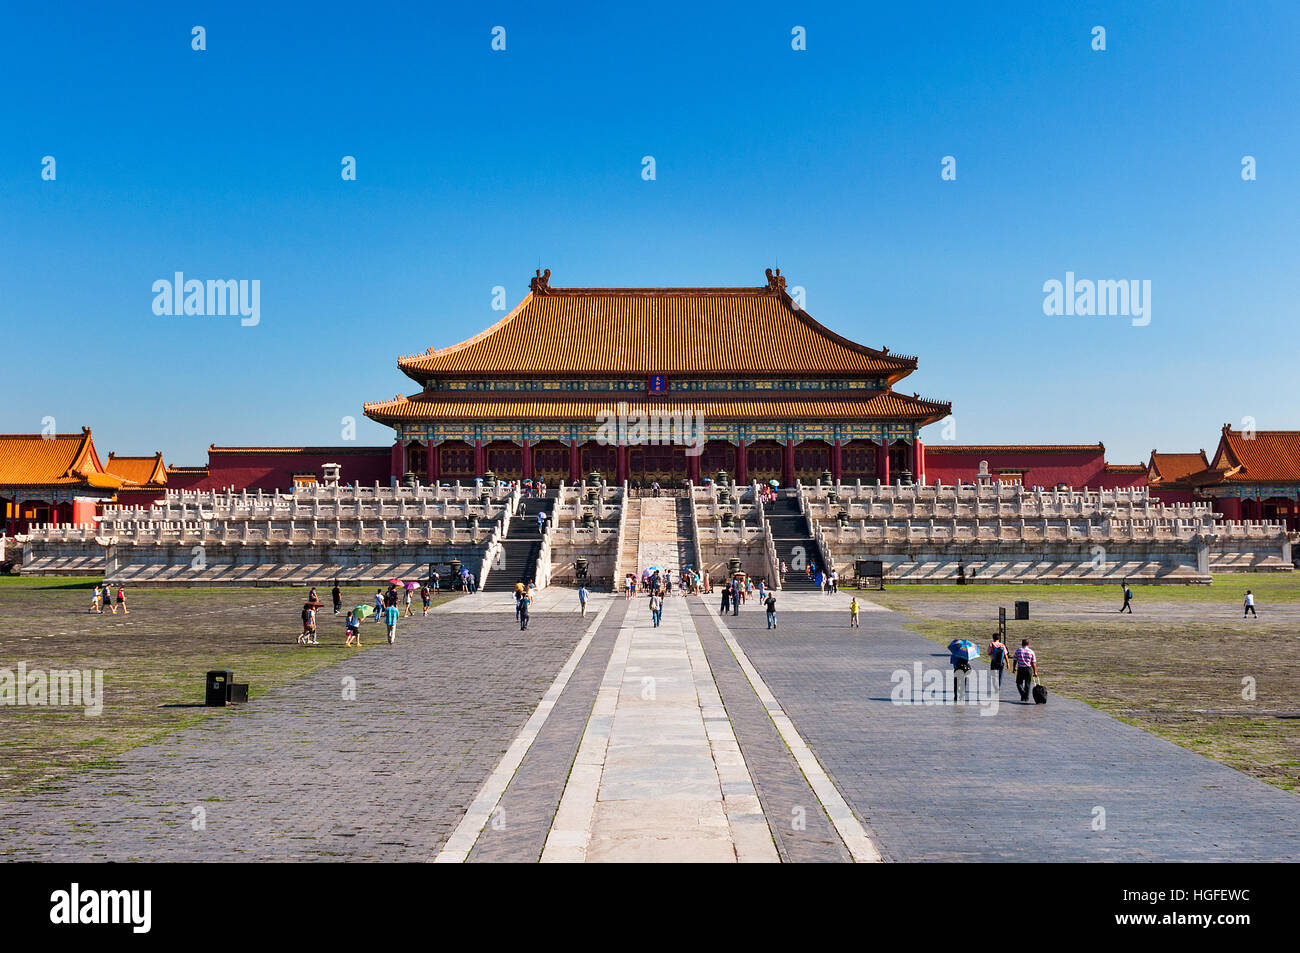 Beijing, China - July 29, 2012: View of the Hall of Supreme Harmony in the Forbidden City, Beijing, China. Stock Photo